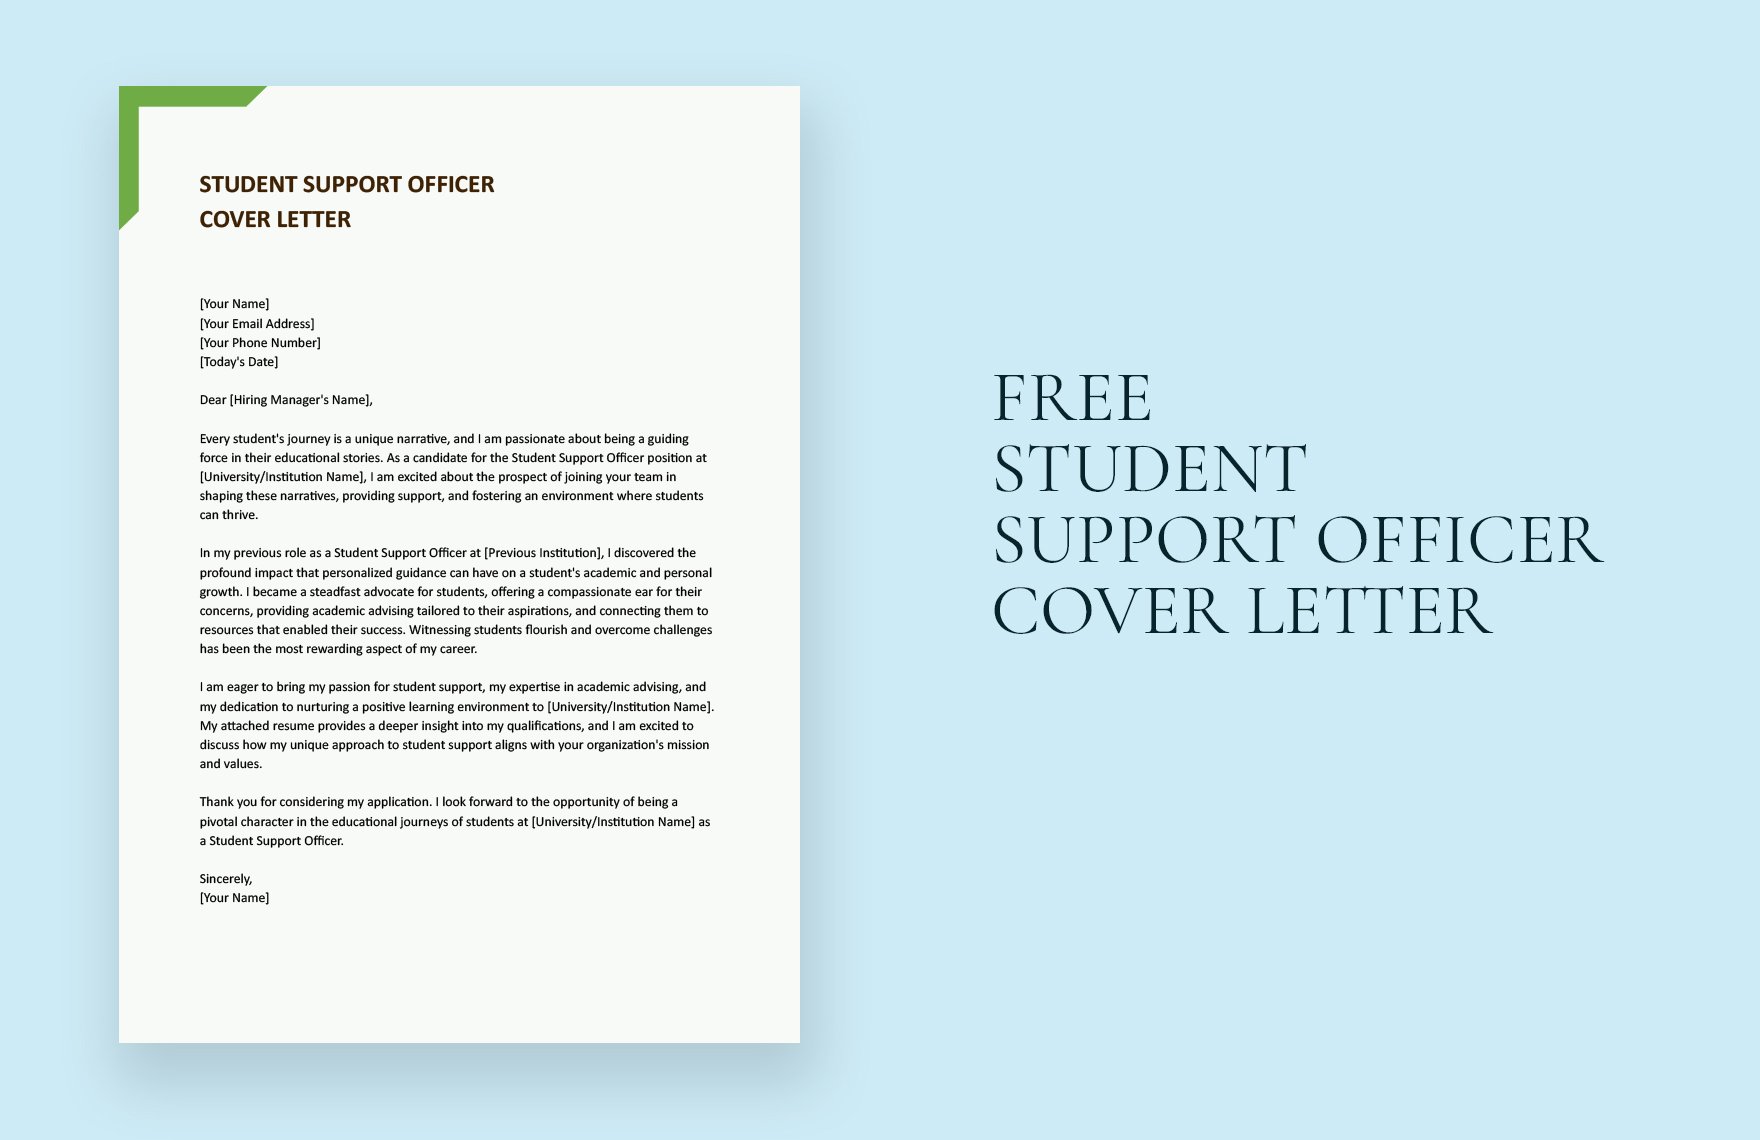 Student Support Officer Cover Letter in Word, Google Docs